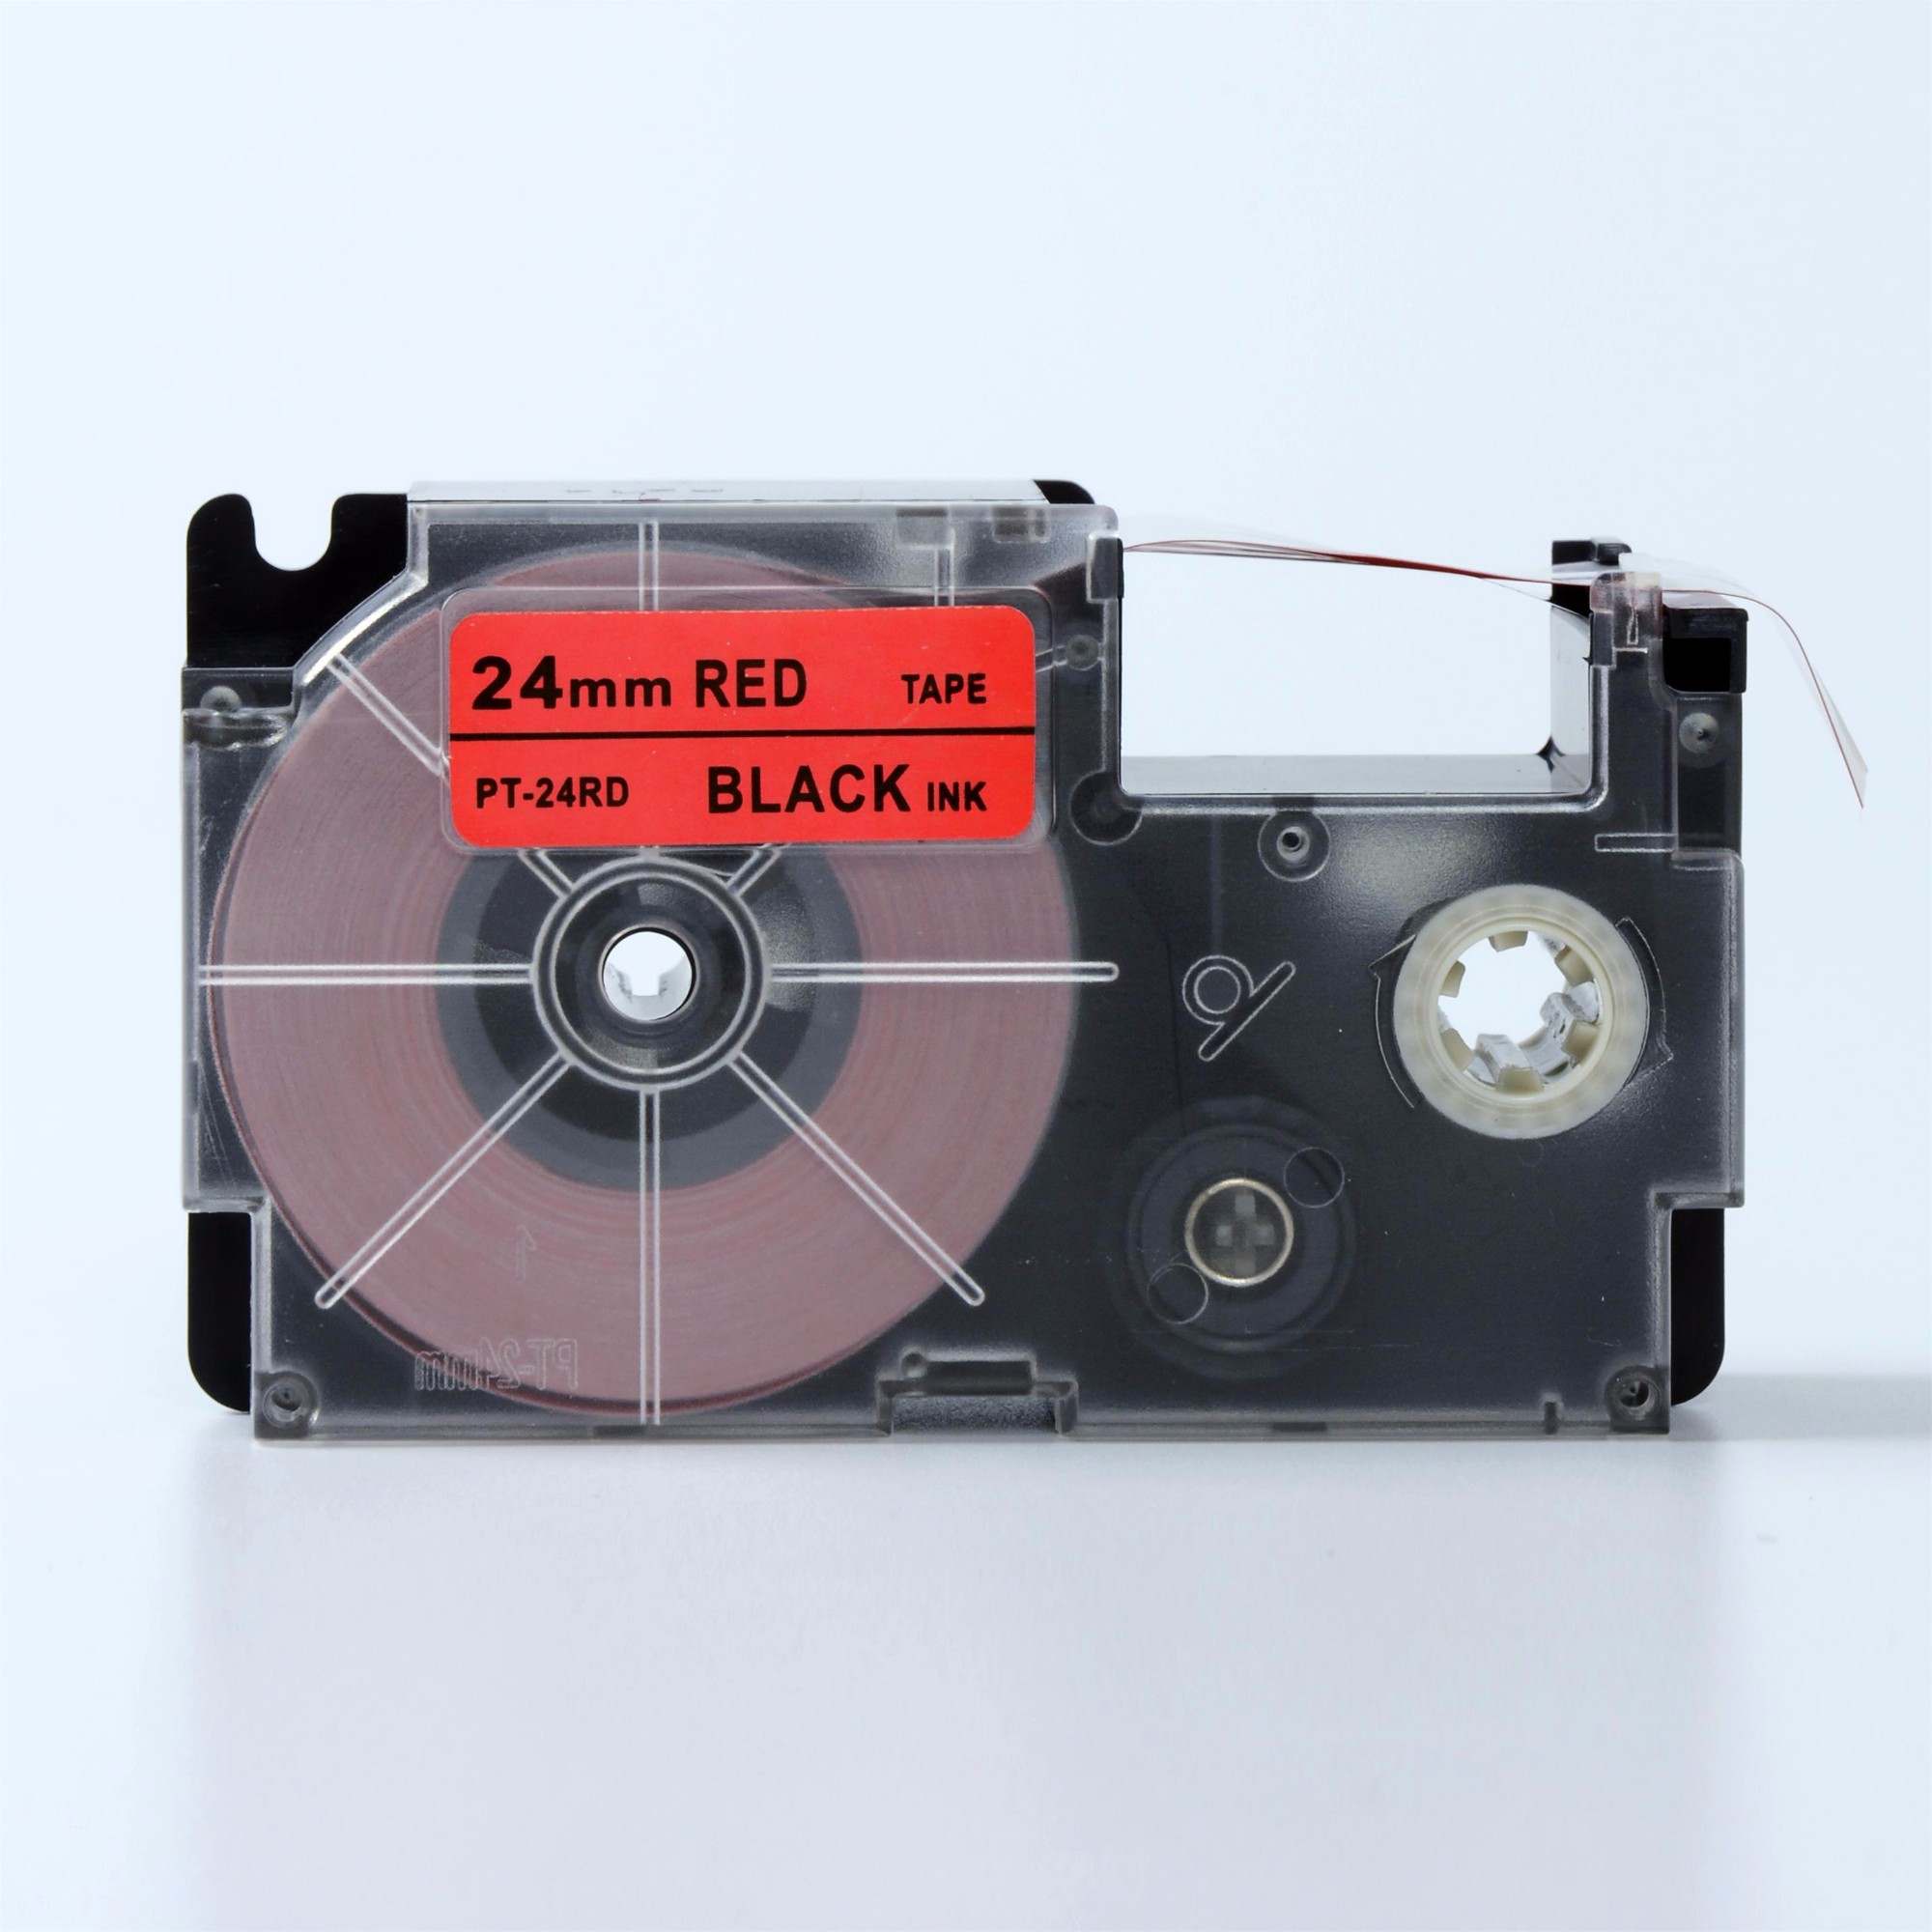 Compatible label tape for Casio XR-24RD1